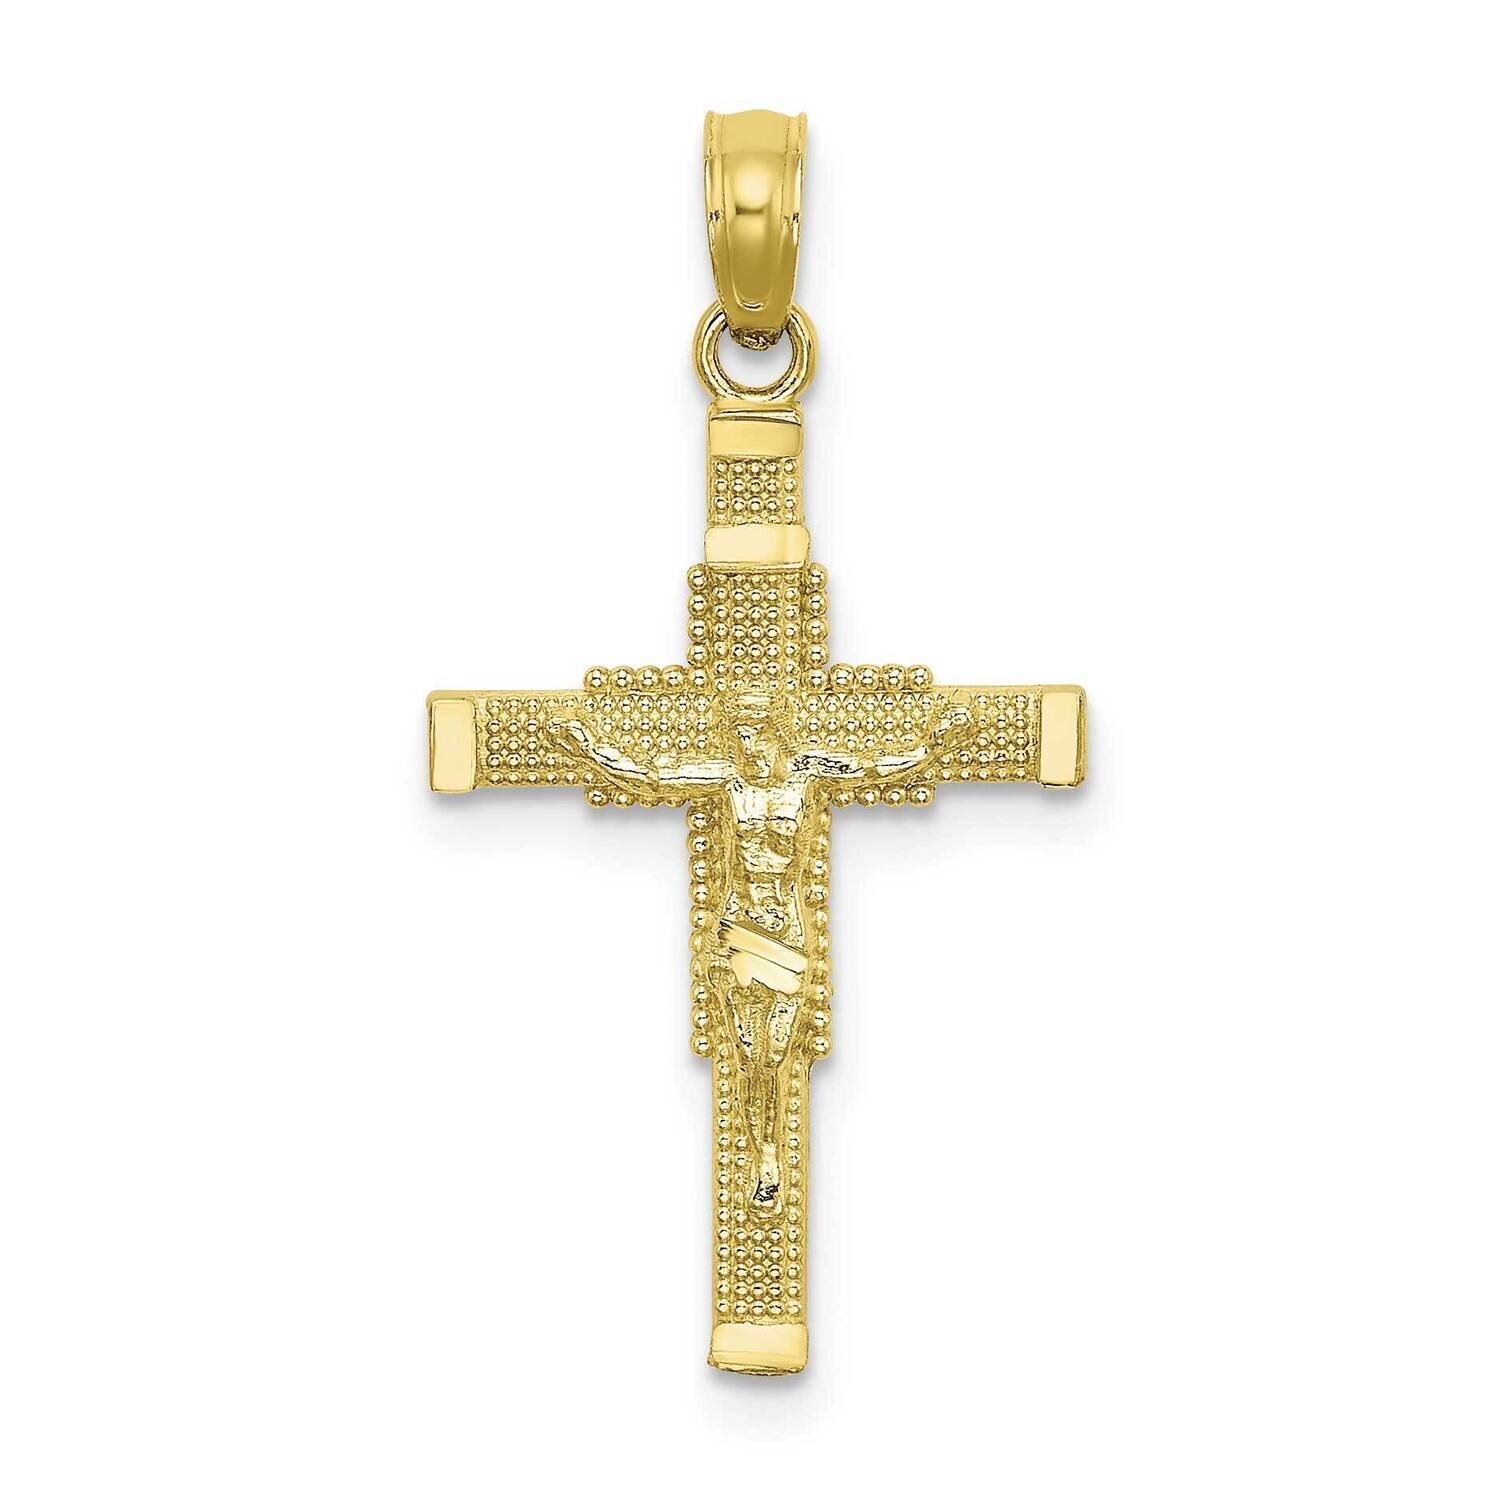 Beaded Accent with Cross Behind Crucifix Charm 10k Gold 10K8587